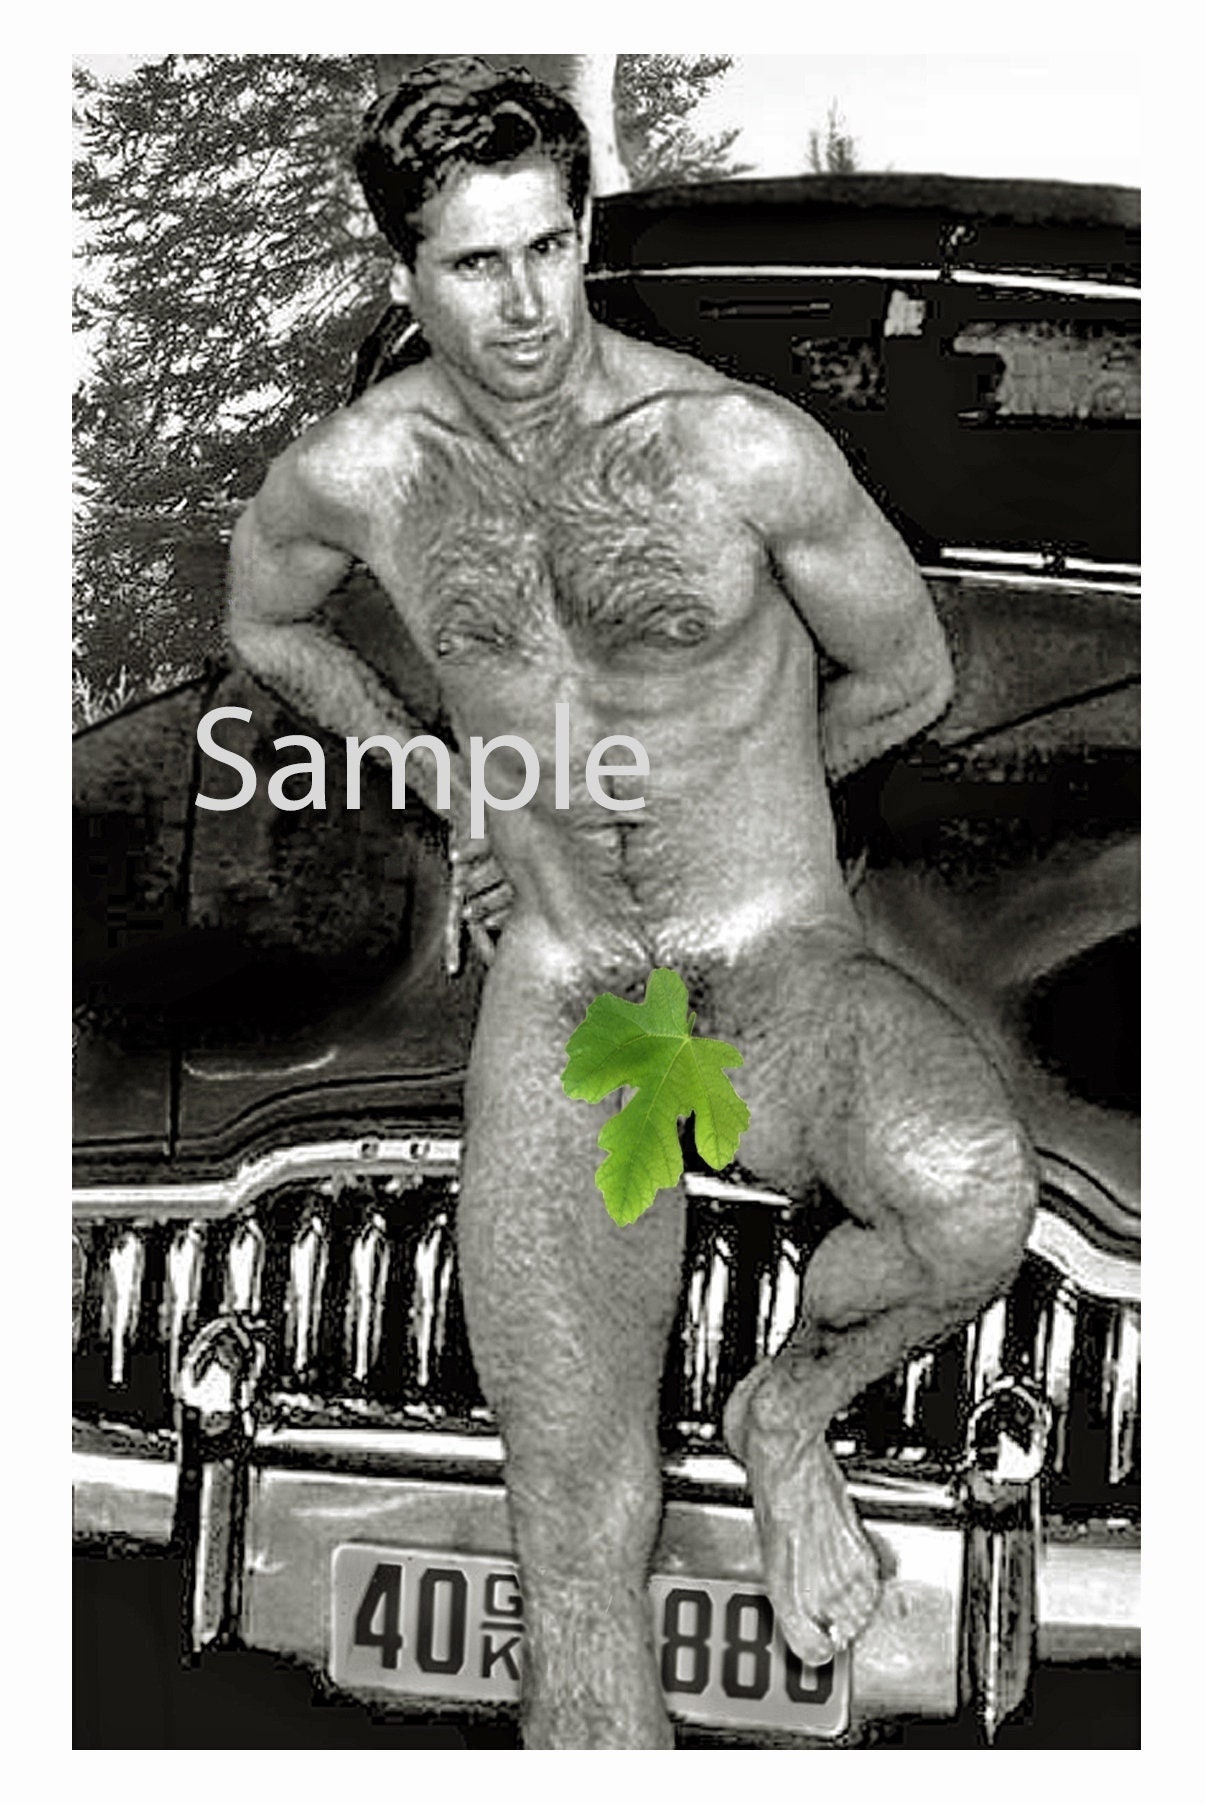 1950s Photo Reprint of a Hairy Muscular Man Posing by